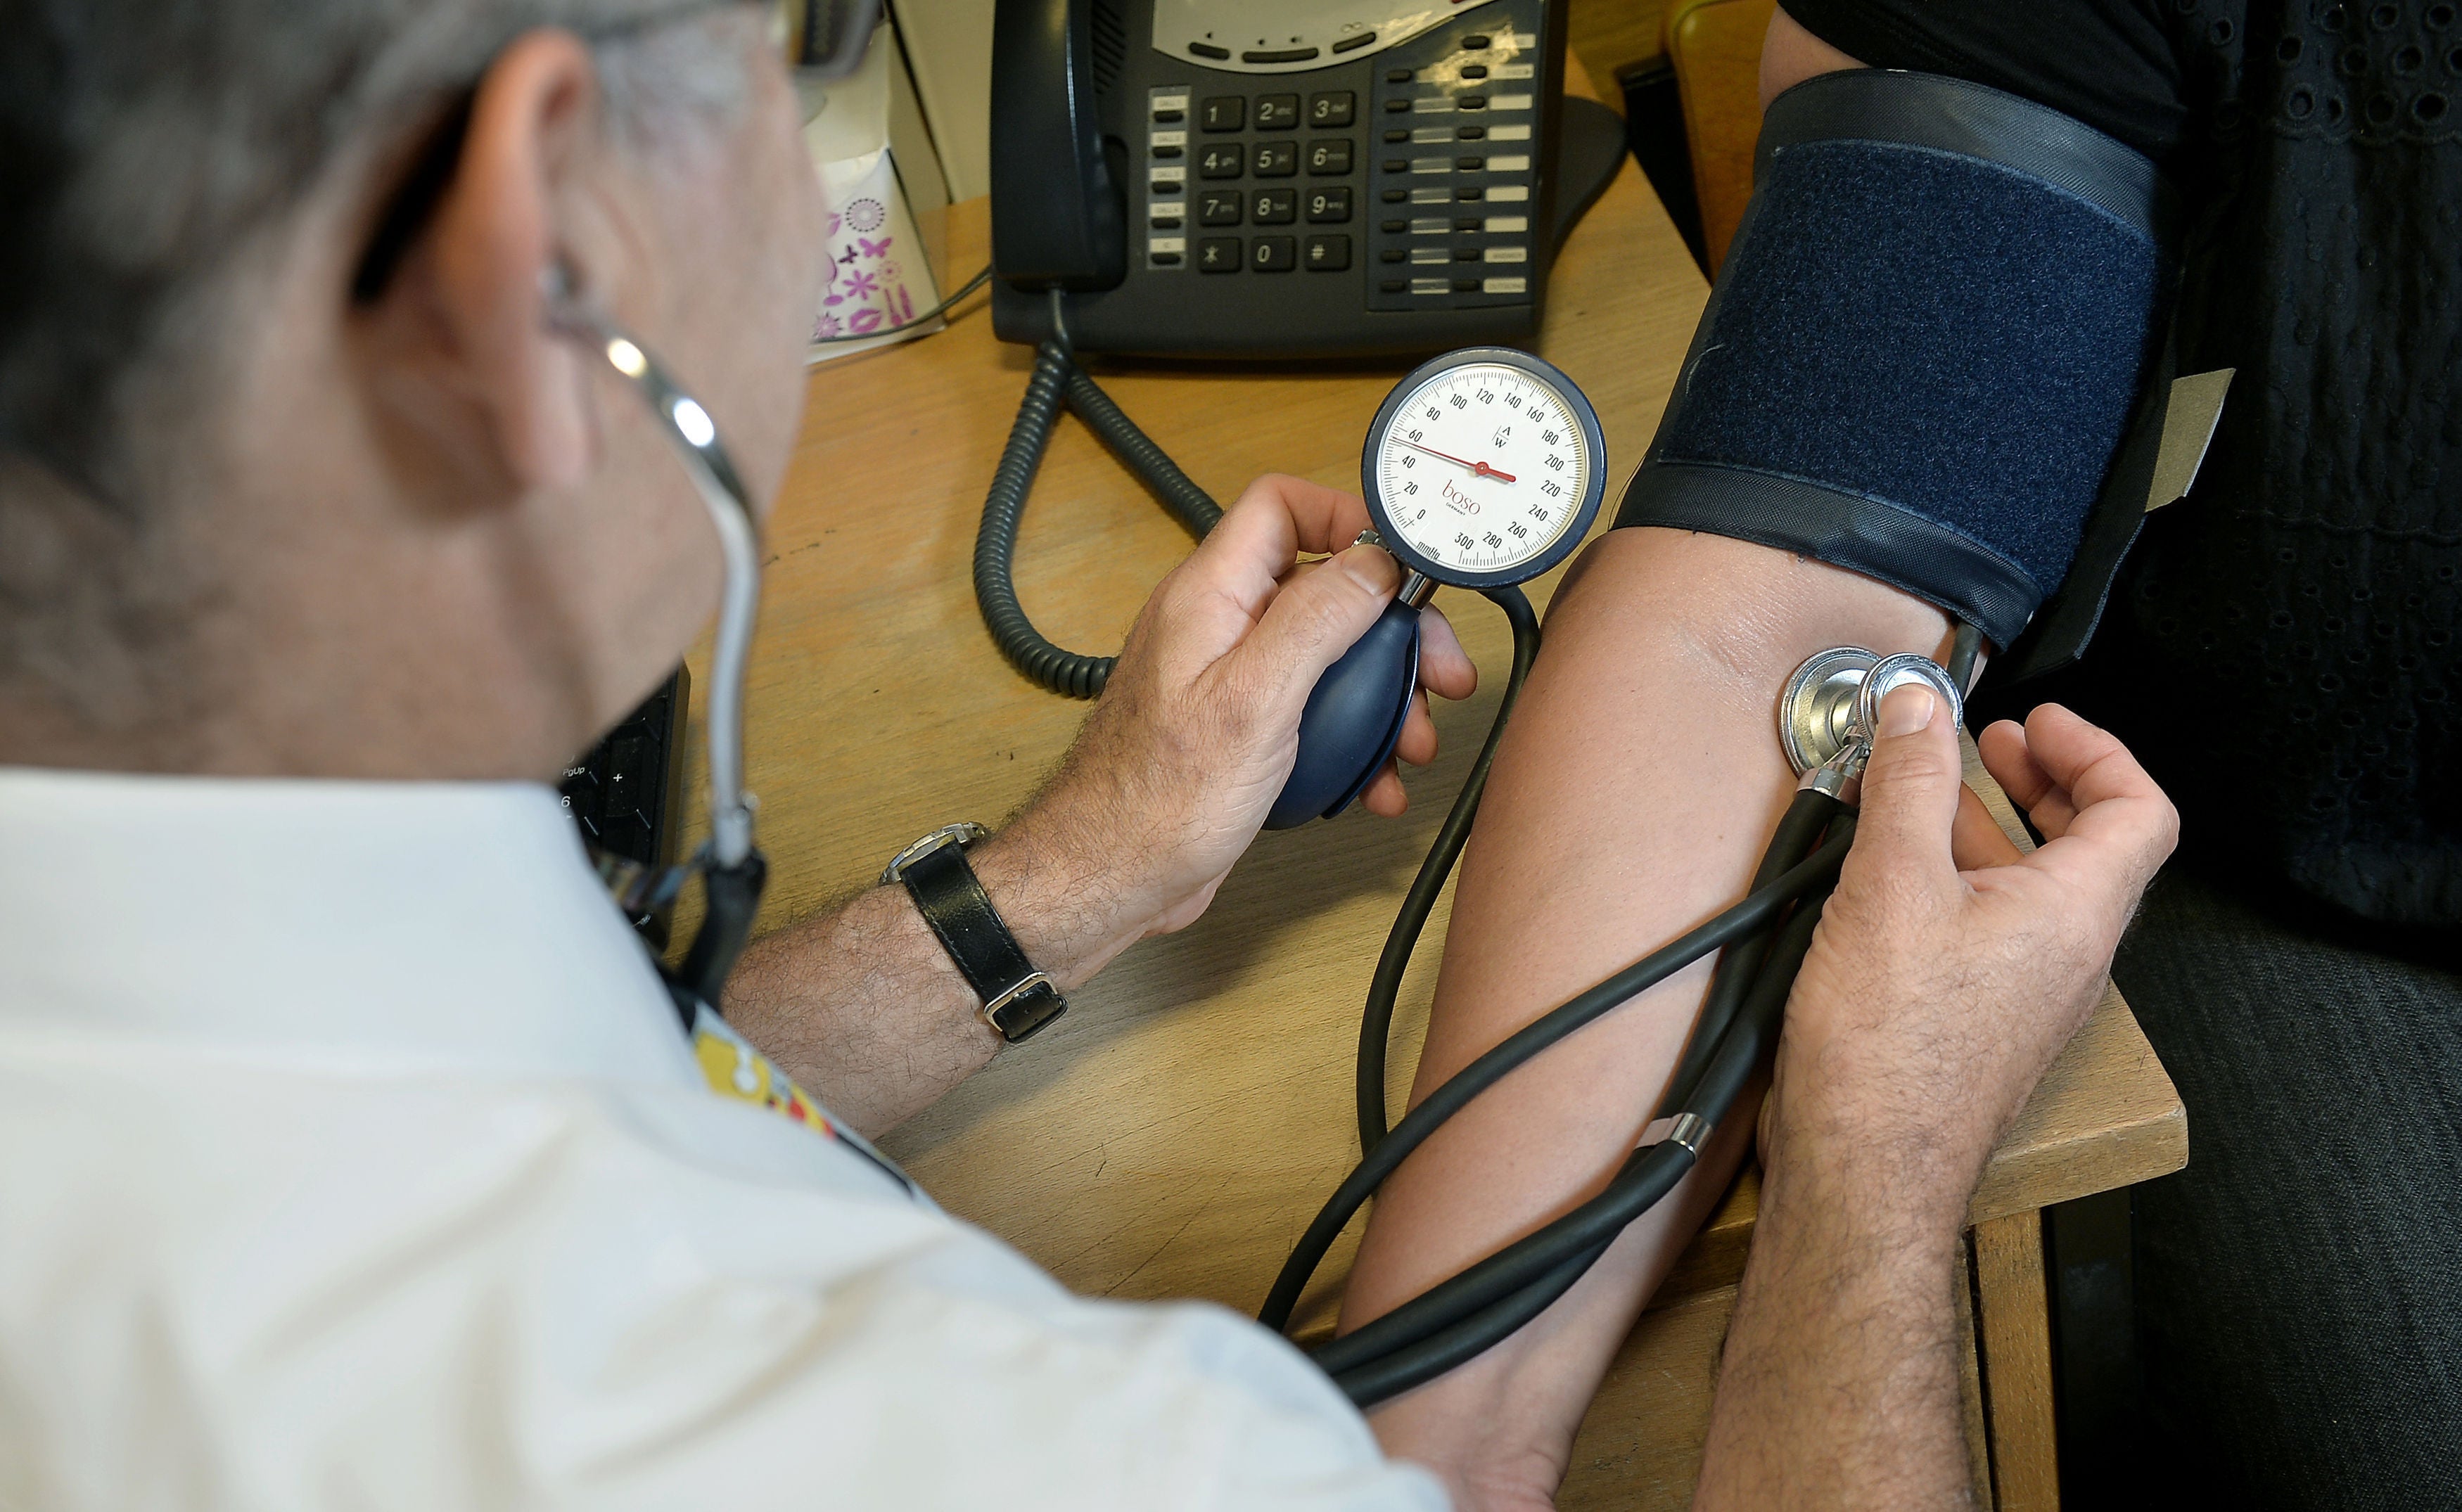 GPs have come under pressure to deliver more face to face appointments